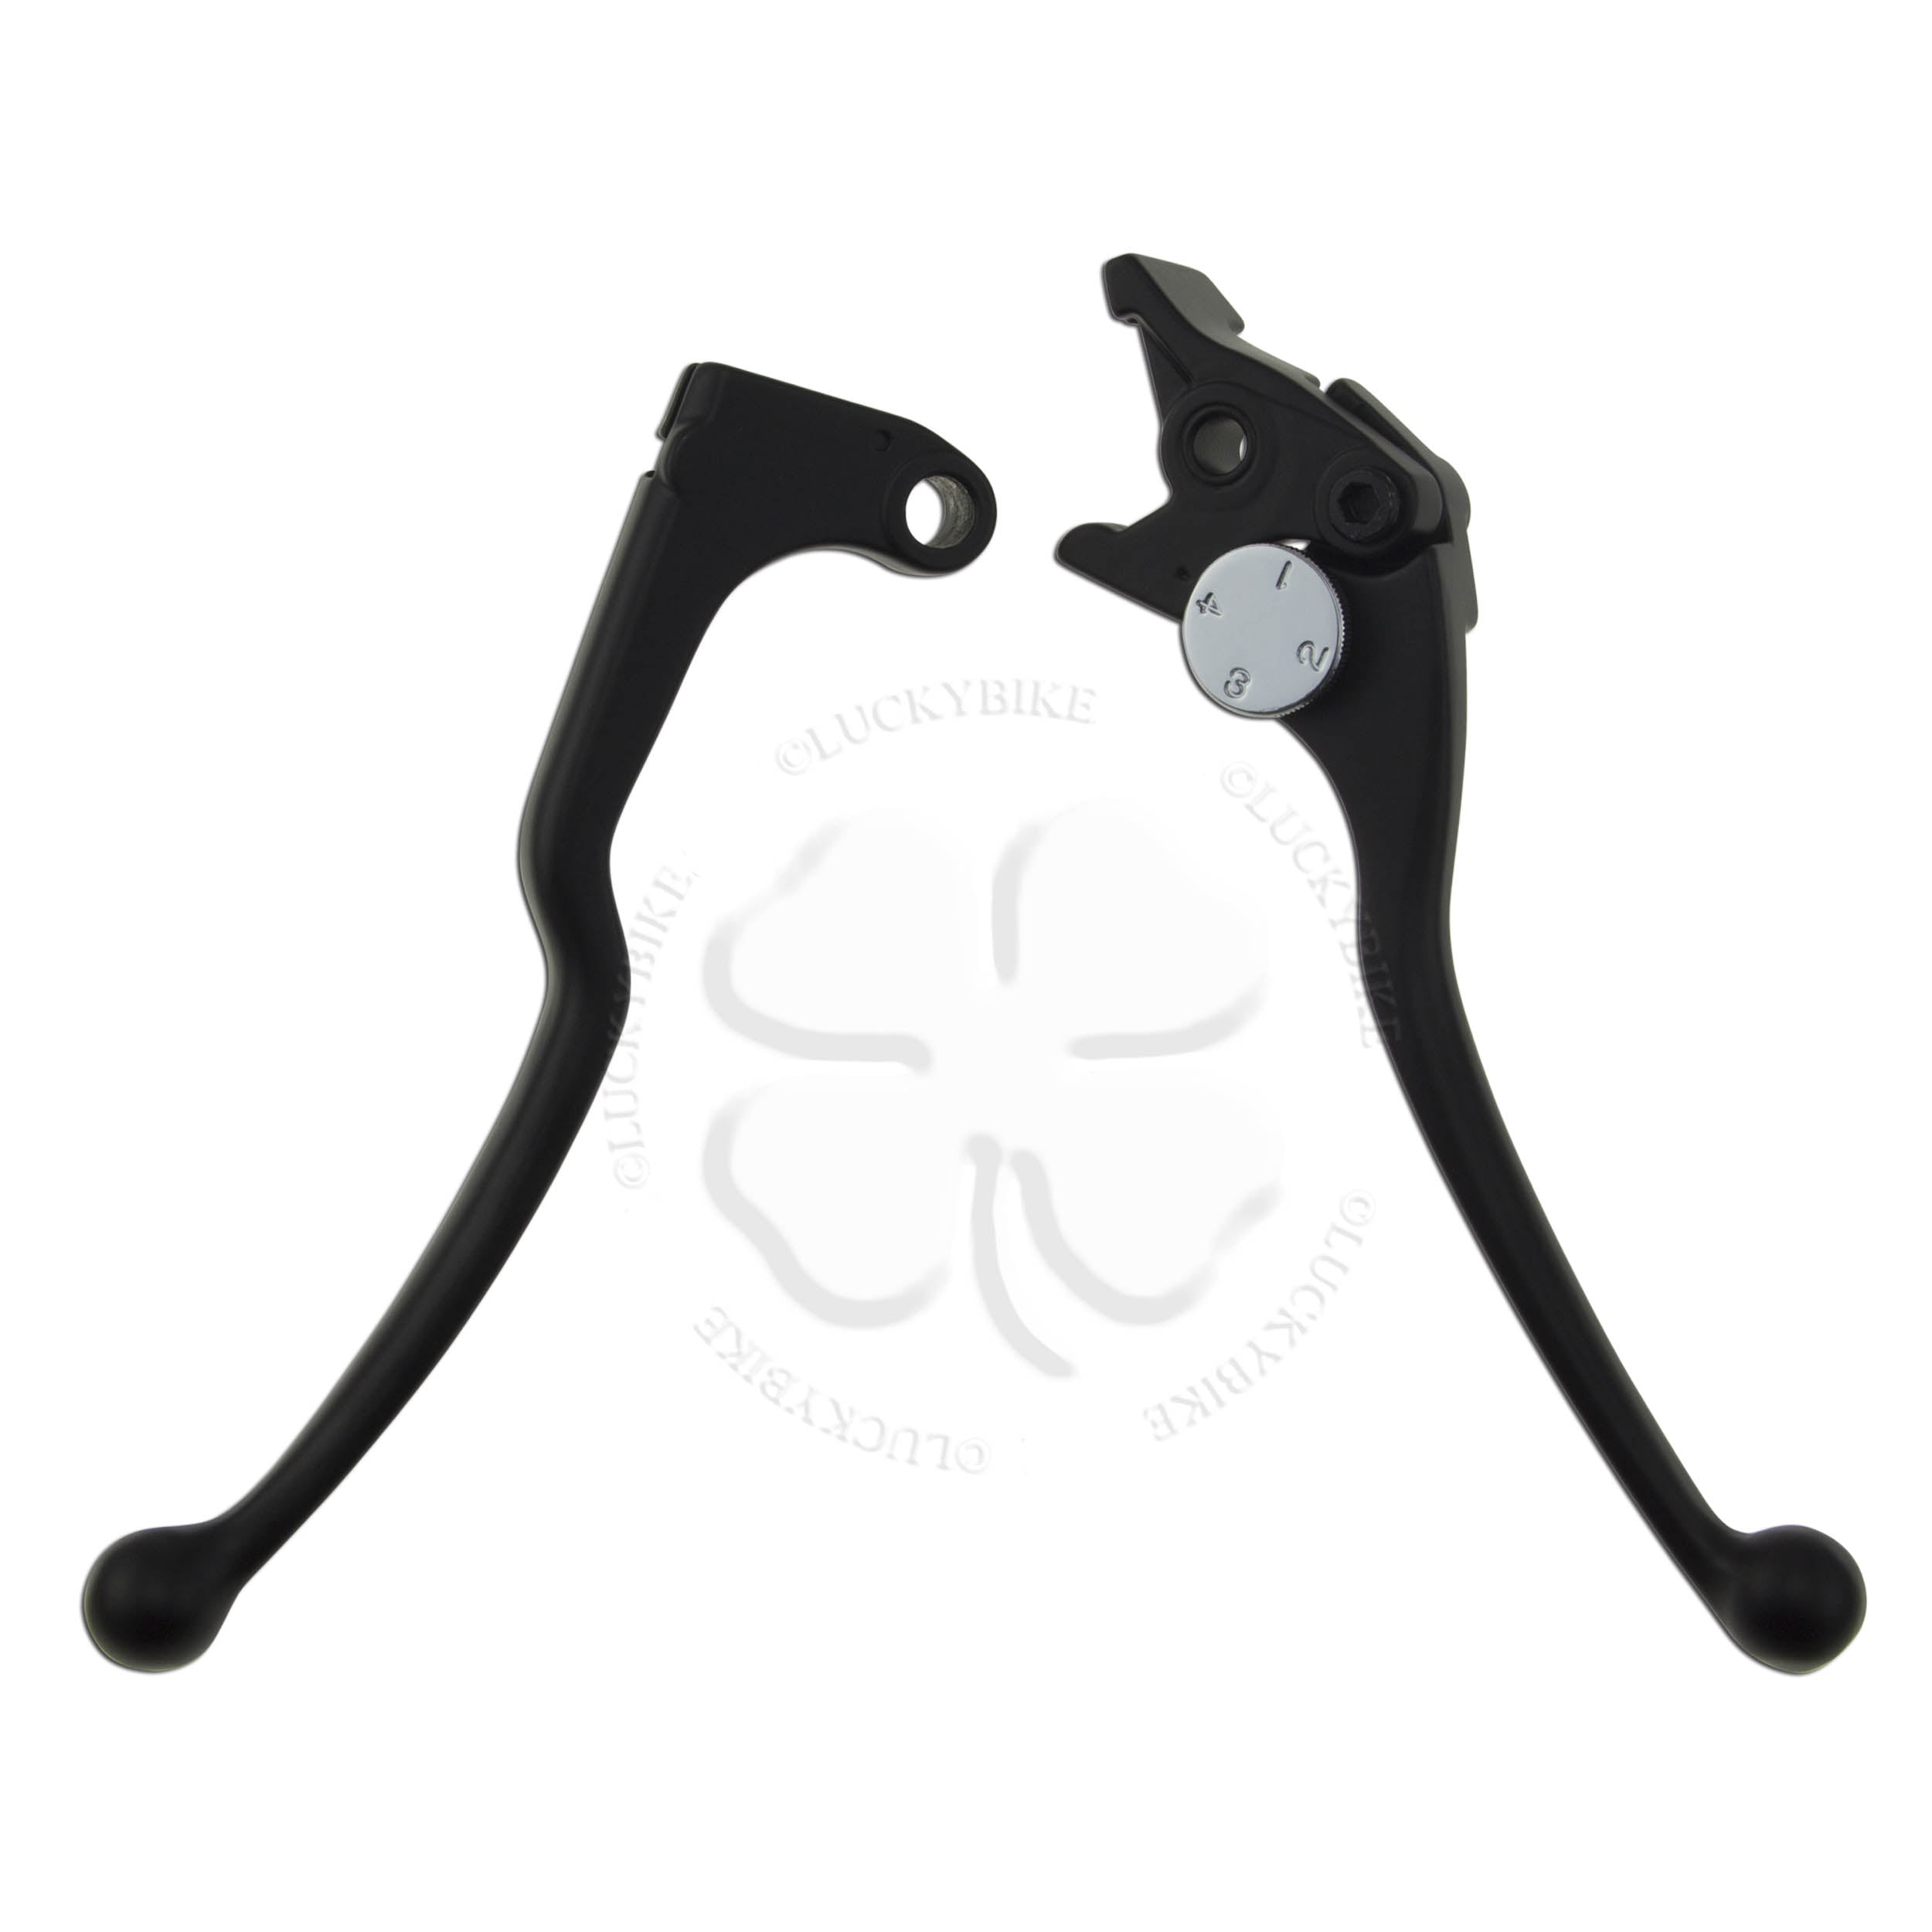 Short Brake and Clutch Levers for Yamaha YZF R6 1999-2004,R1 2002-2003,FZ1 FAZER 2001-2005,R6S US Version 2006-2009,R6S CANADA Version 2007-2009-Black